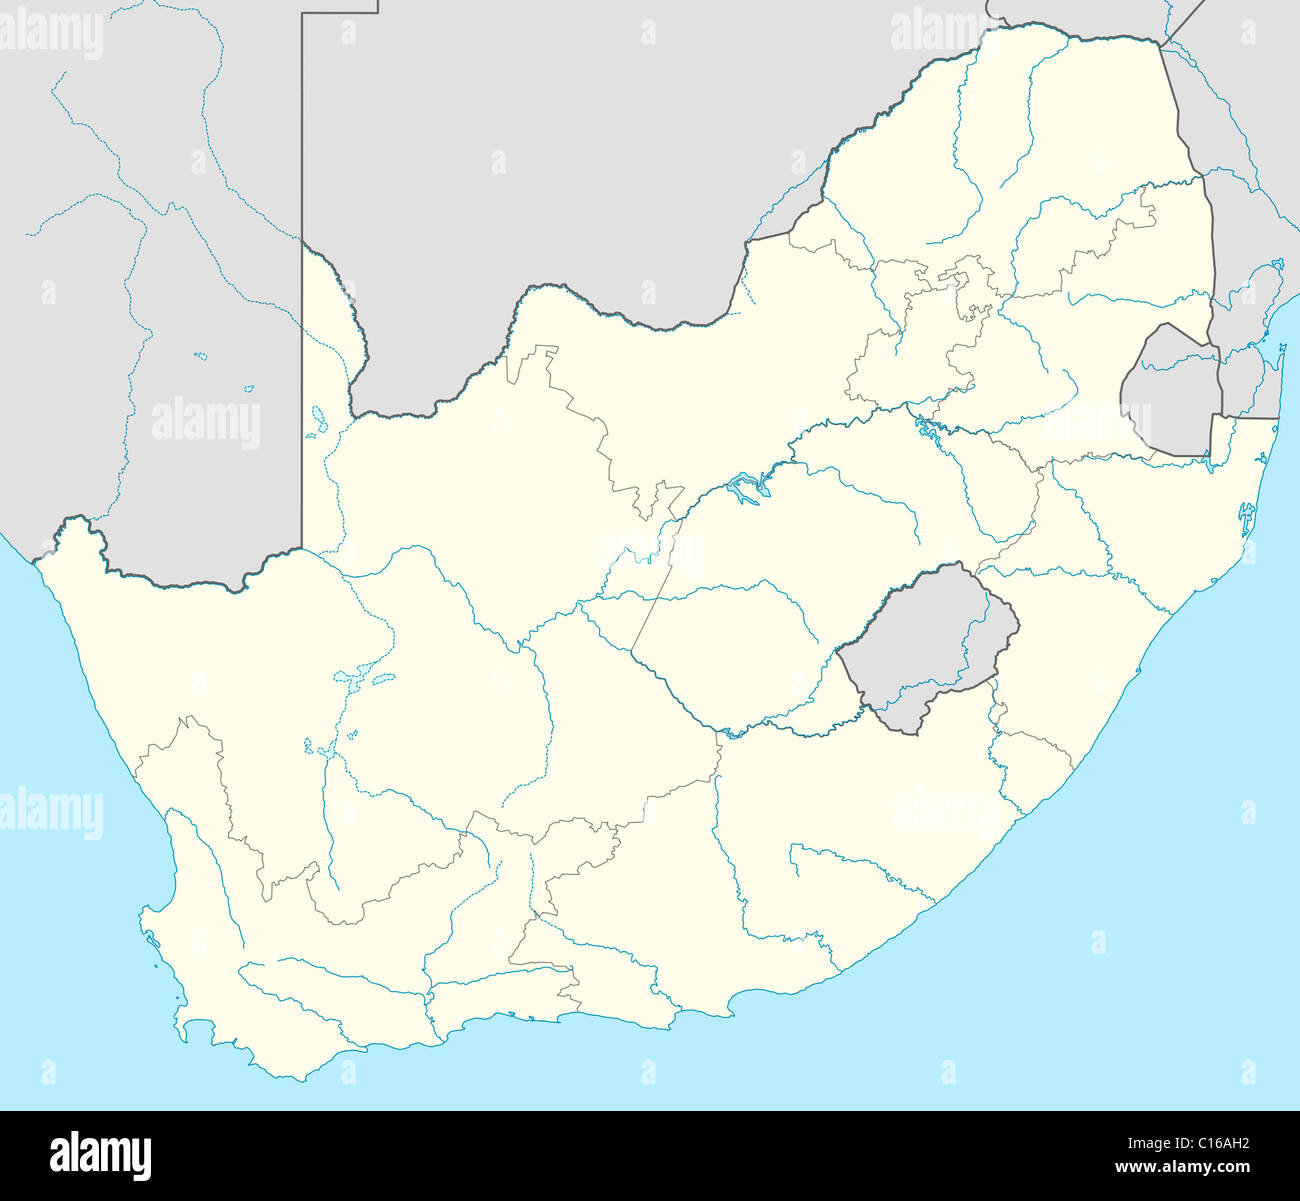 Illustration of South African map showing state borders. Stock Photo